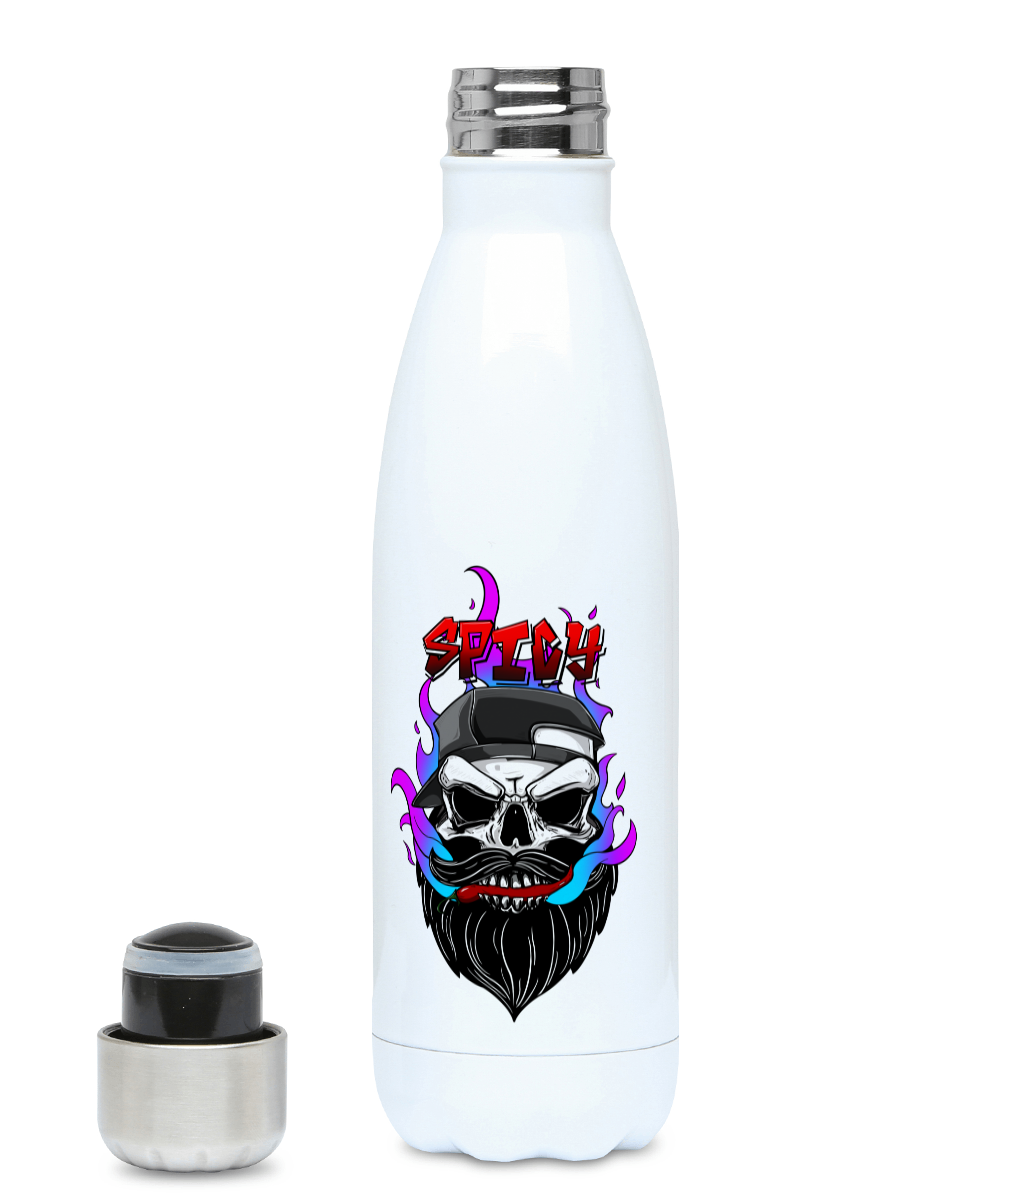 The Brophers Grimm Spicy 500ml Stainless Steel Water Bottle